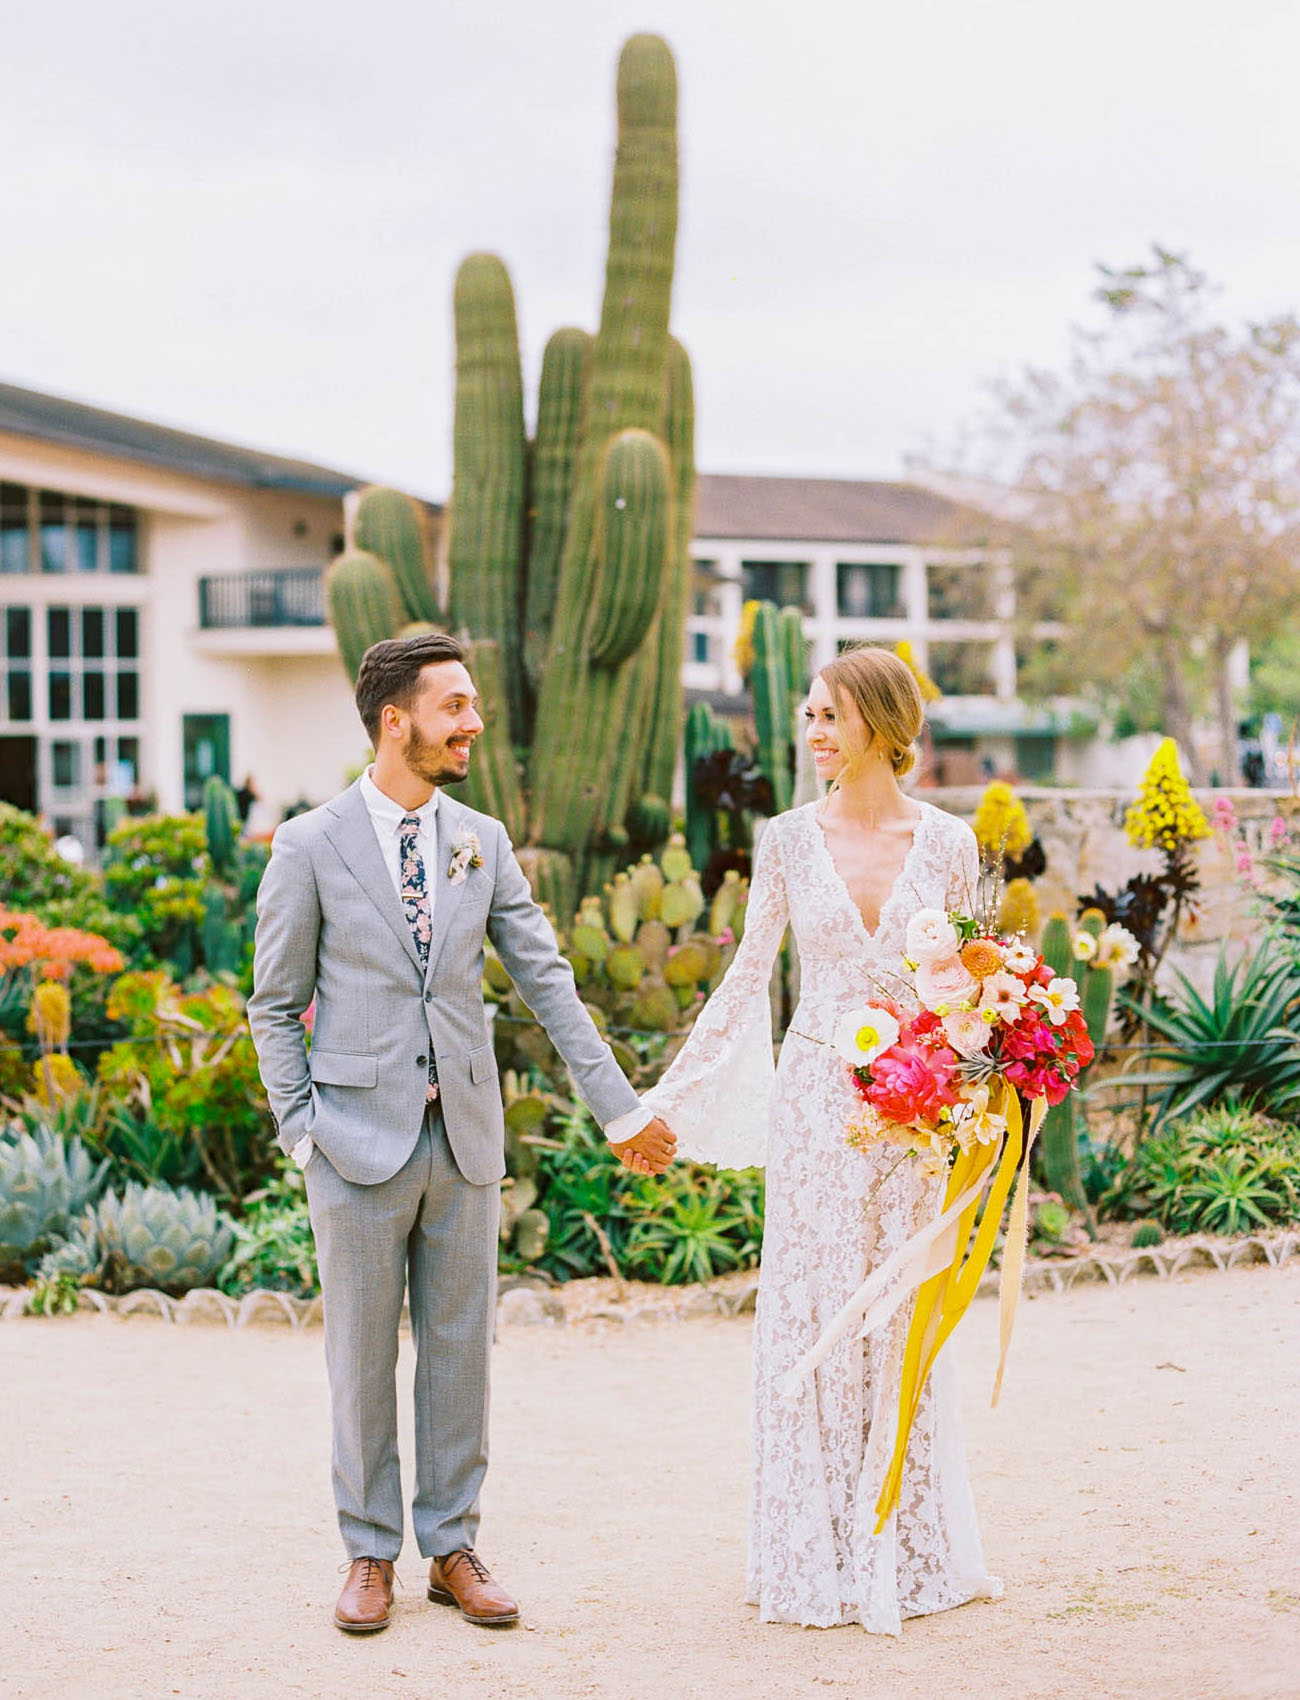 This couple went for a colorful Spanish inspired wedding with a boo and 70s feel